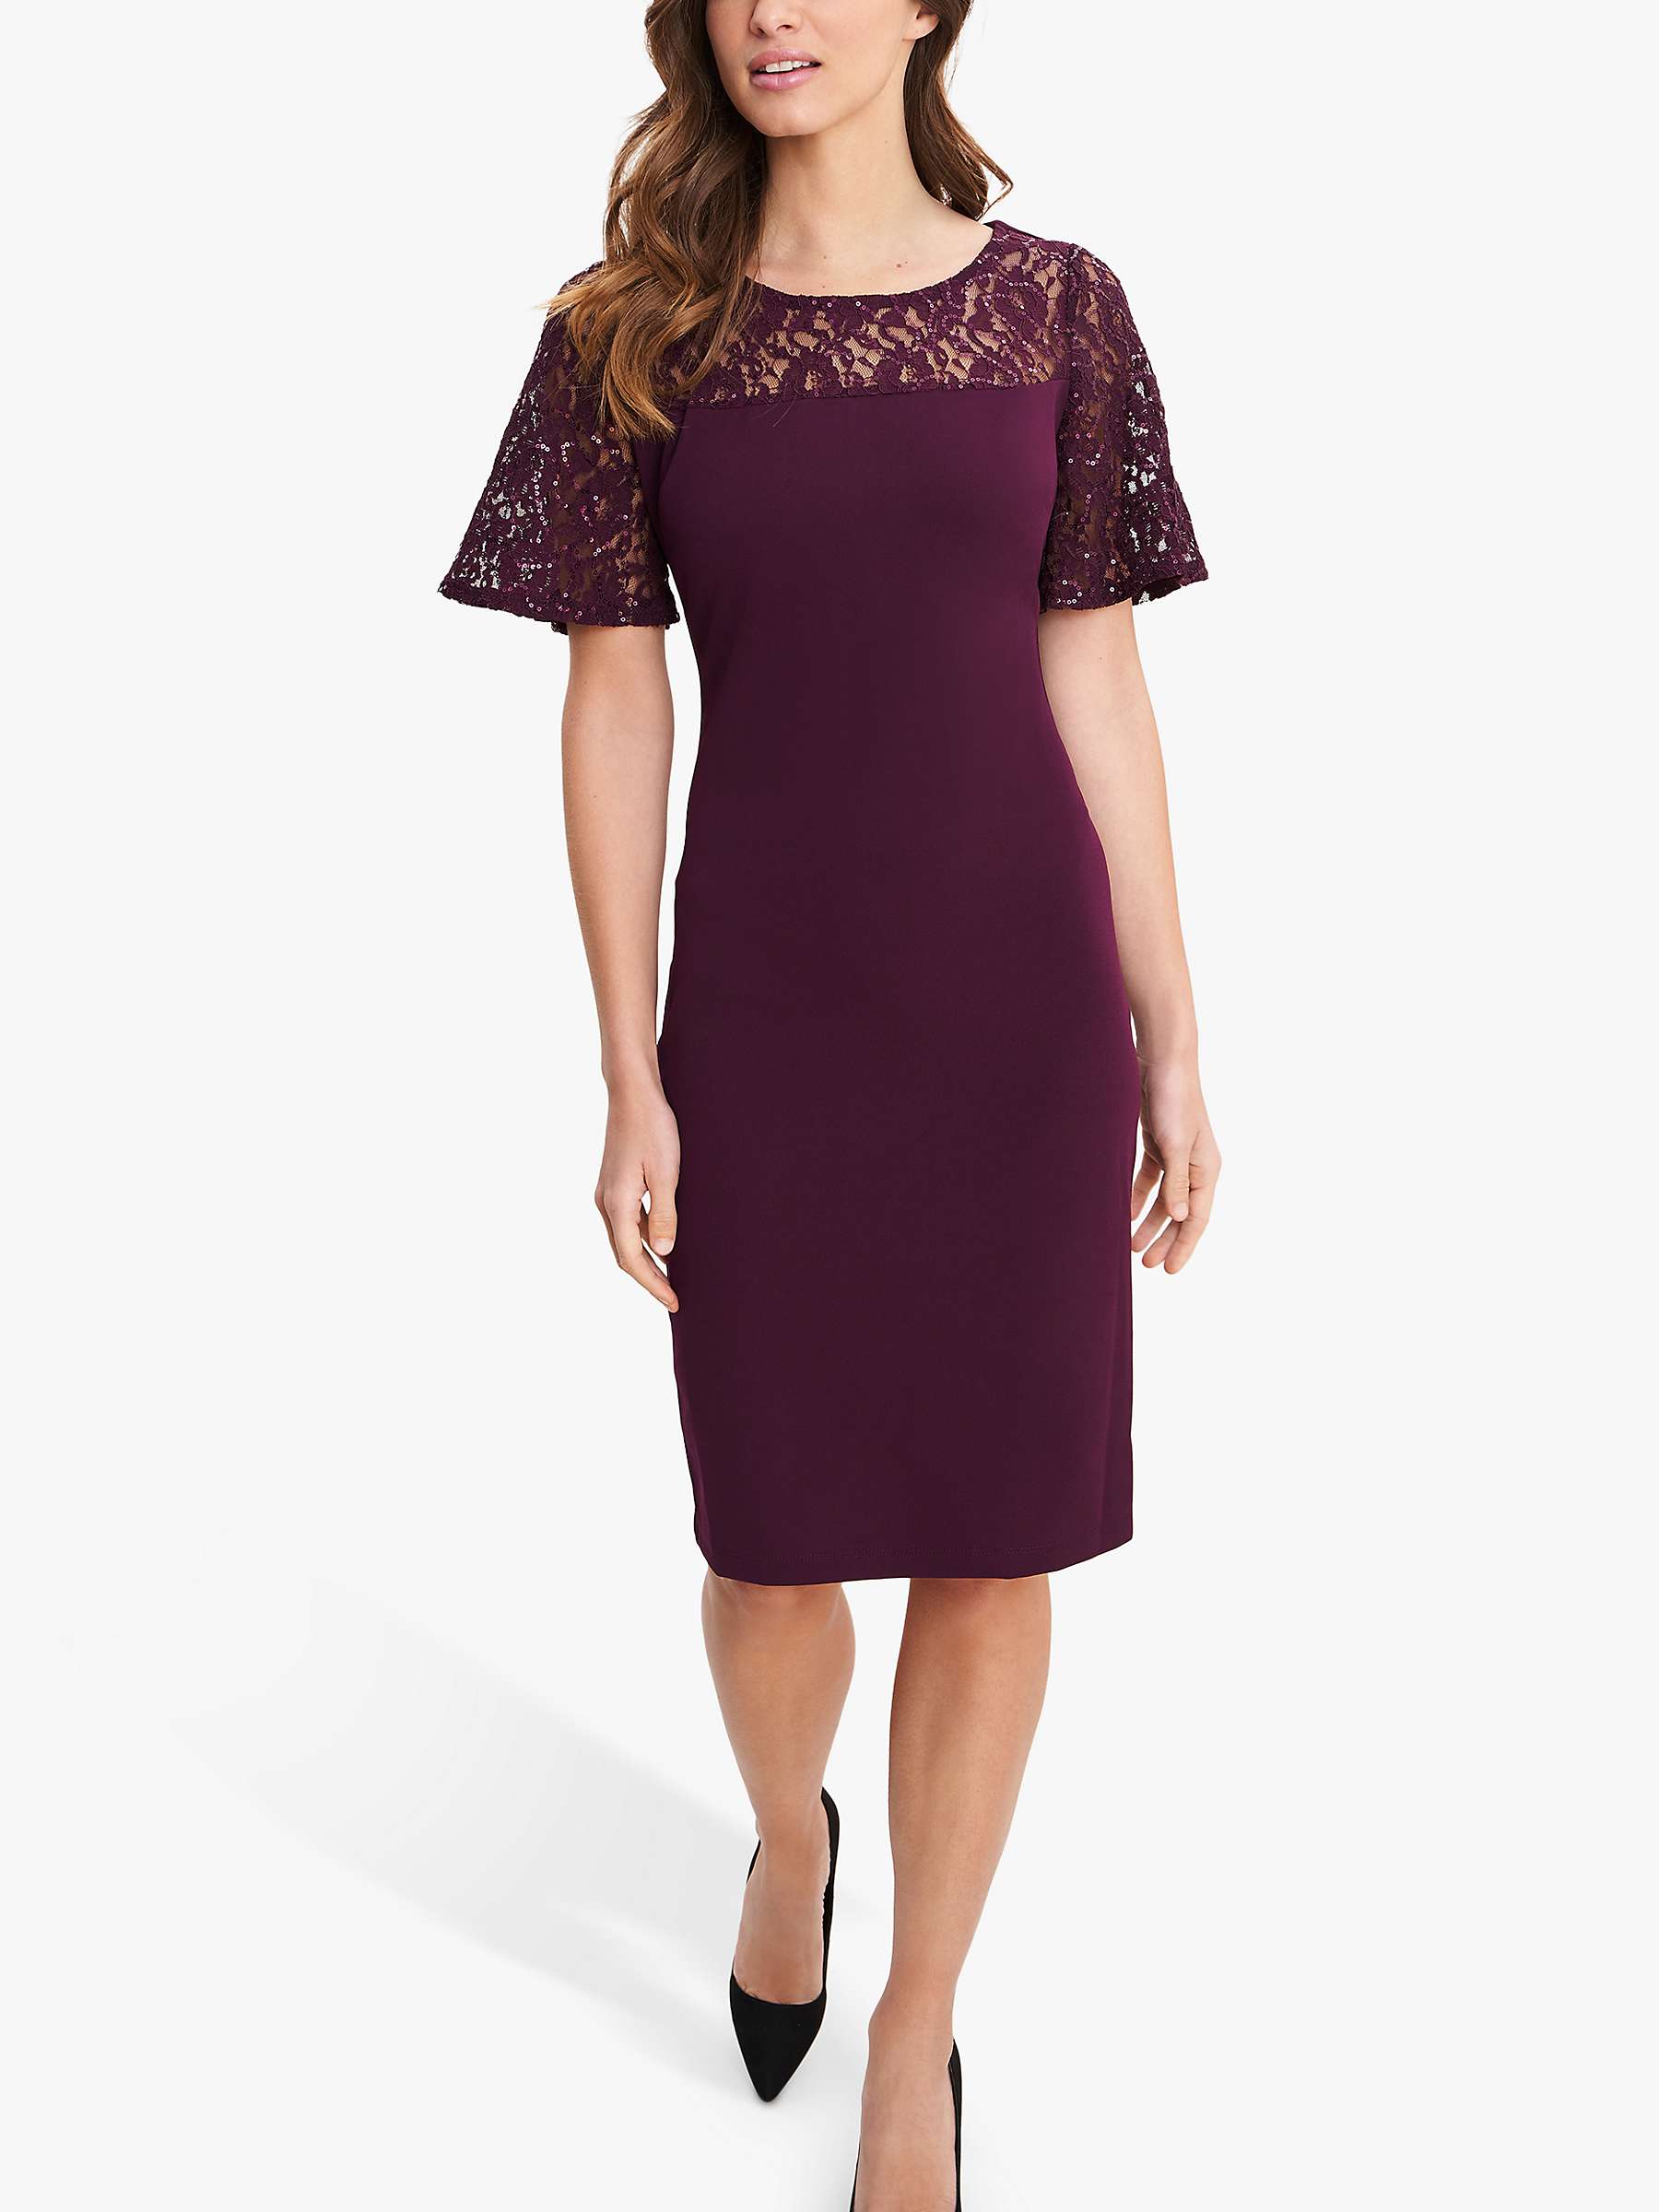 Buy Gina Bacconi Imola Lace Cocktail Dress Online at johnlewis.com